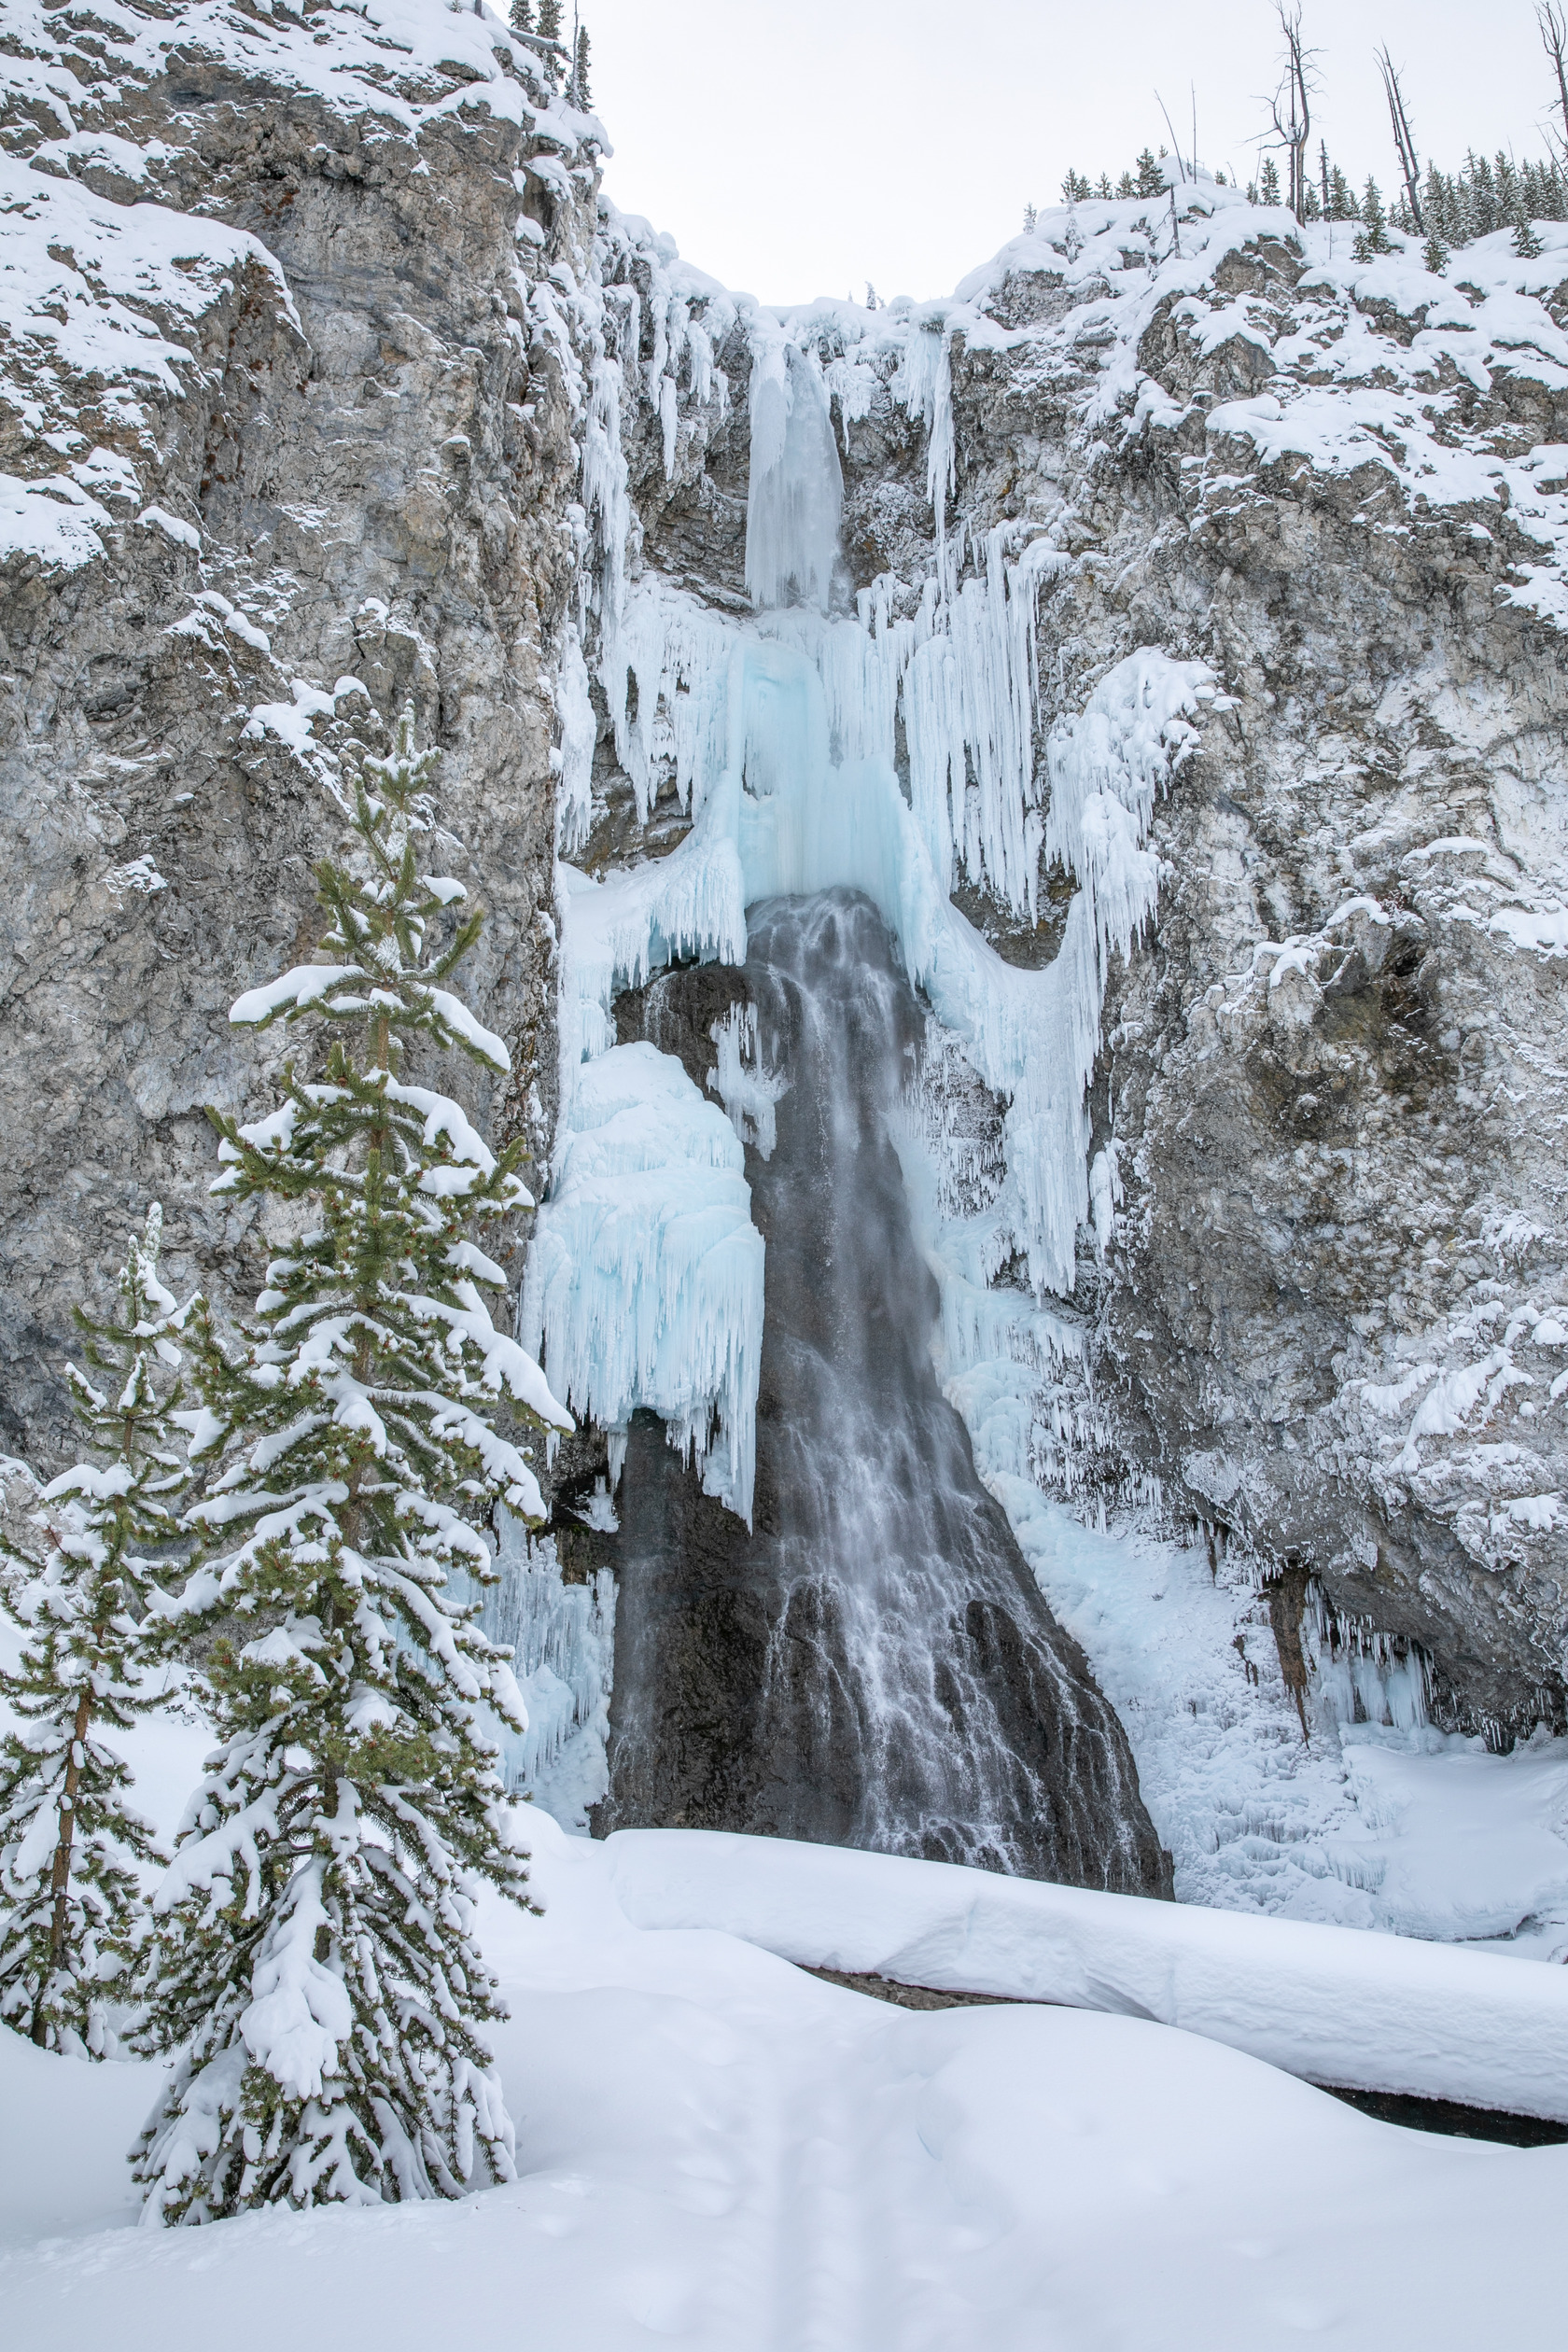 A small stream of water flows over a steep cliff and many icicles have formed on the edges